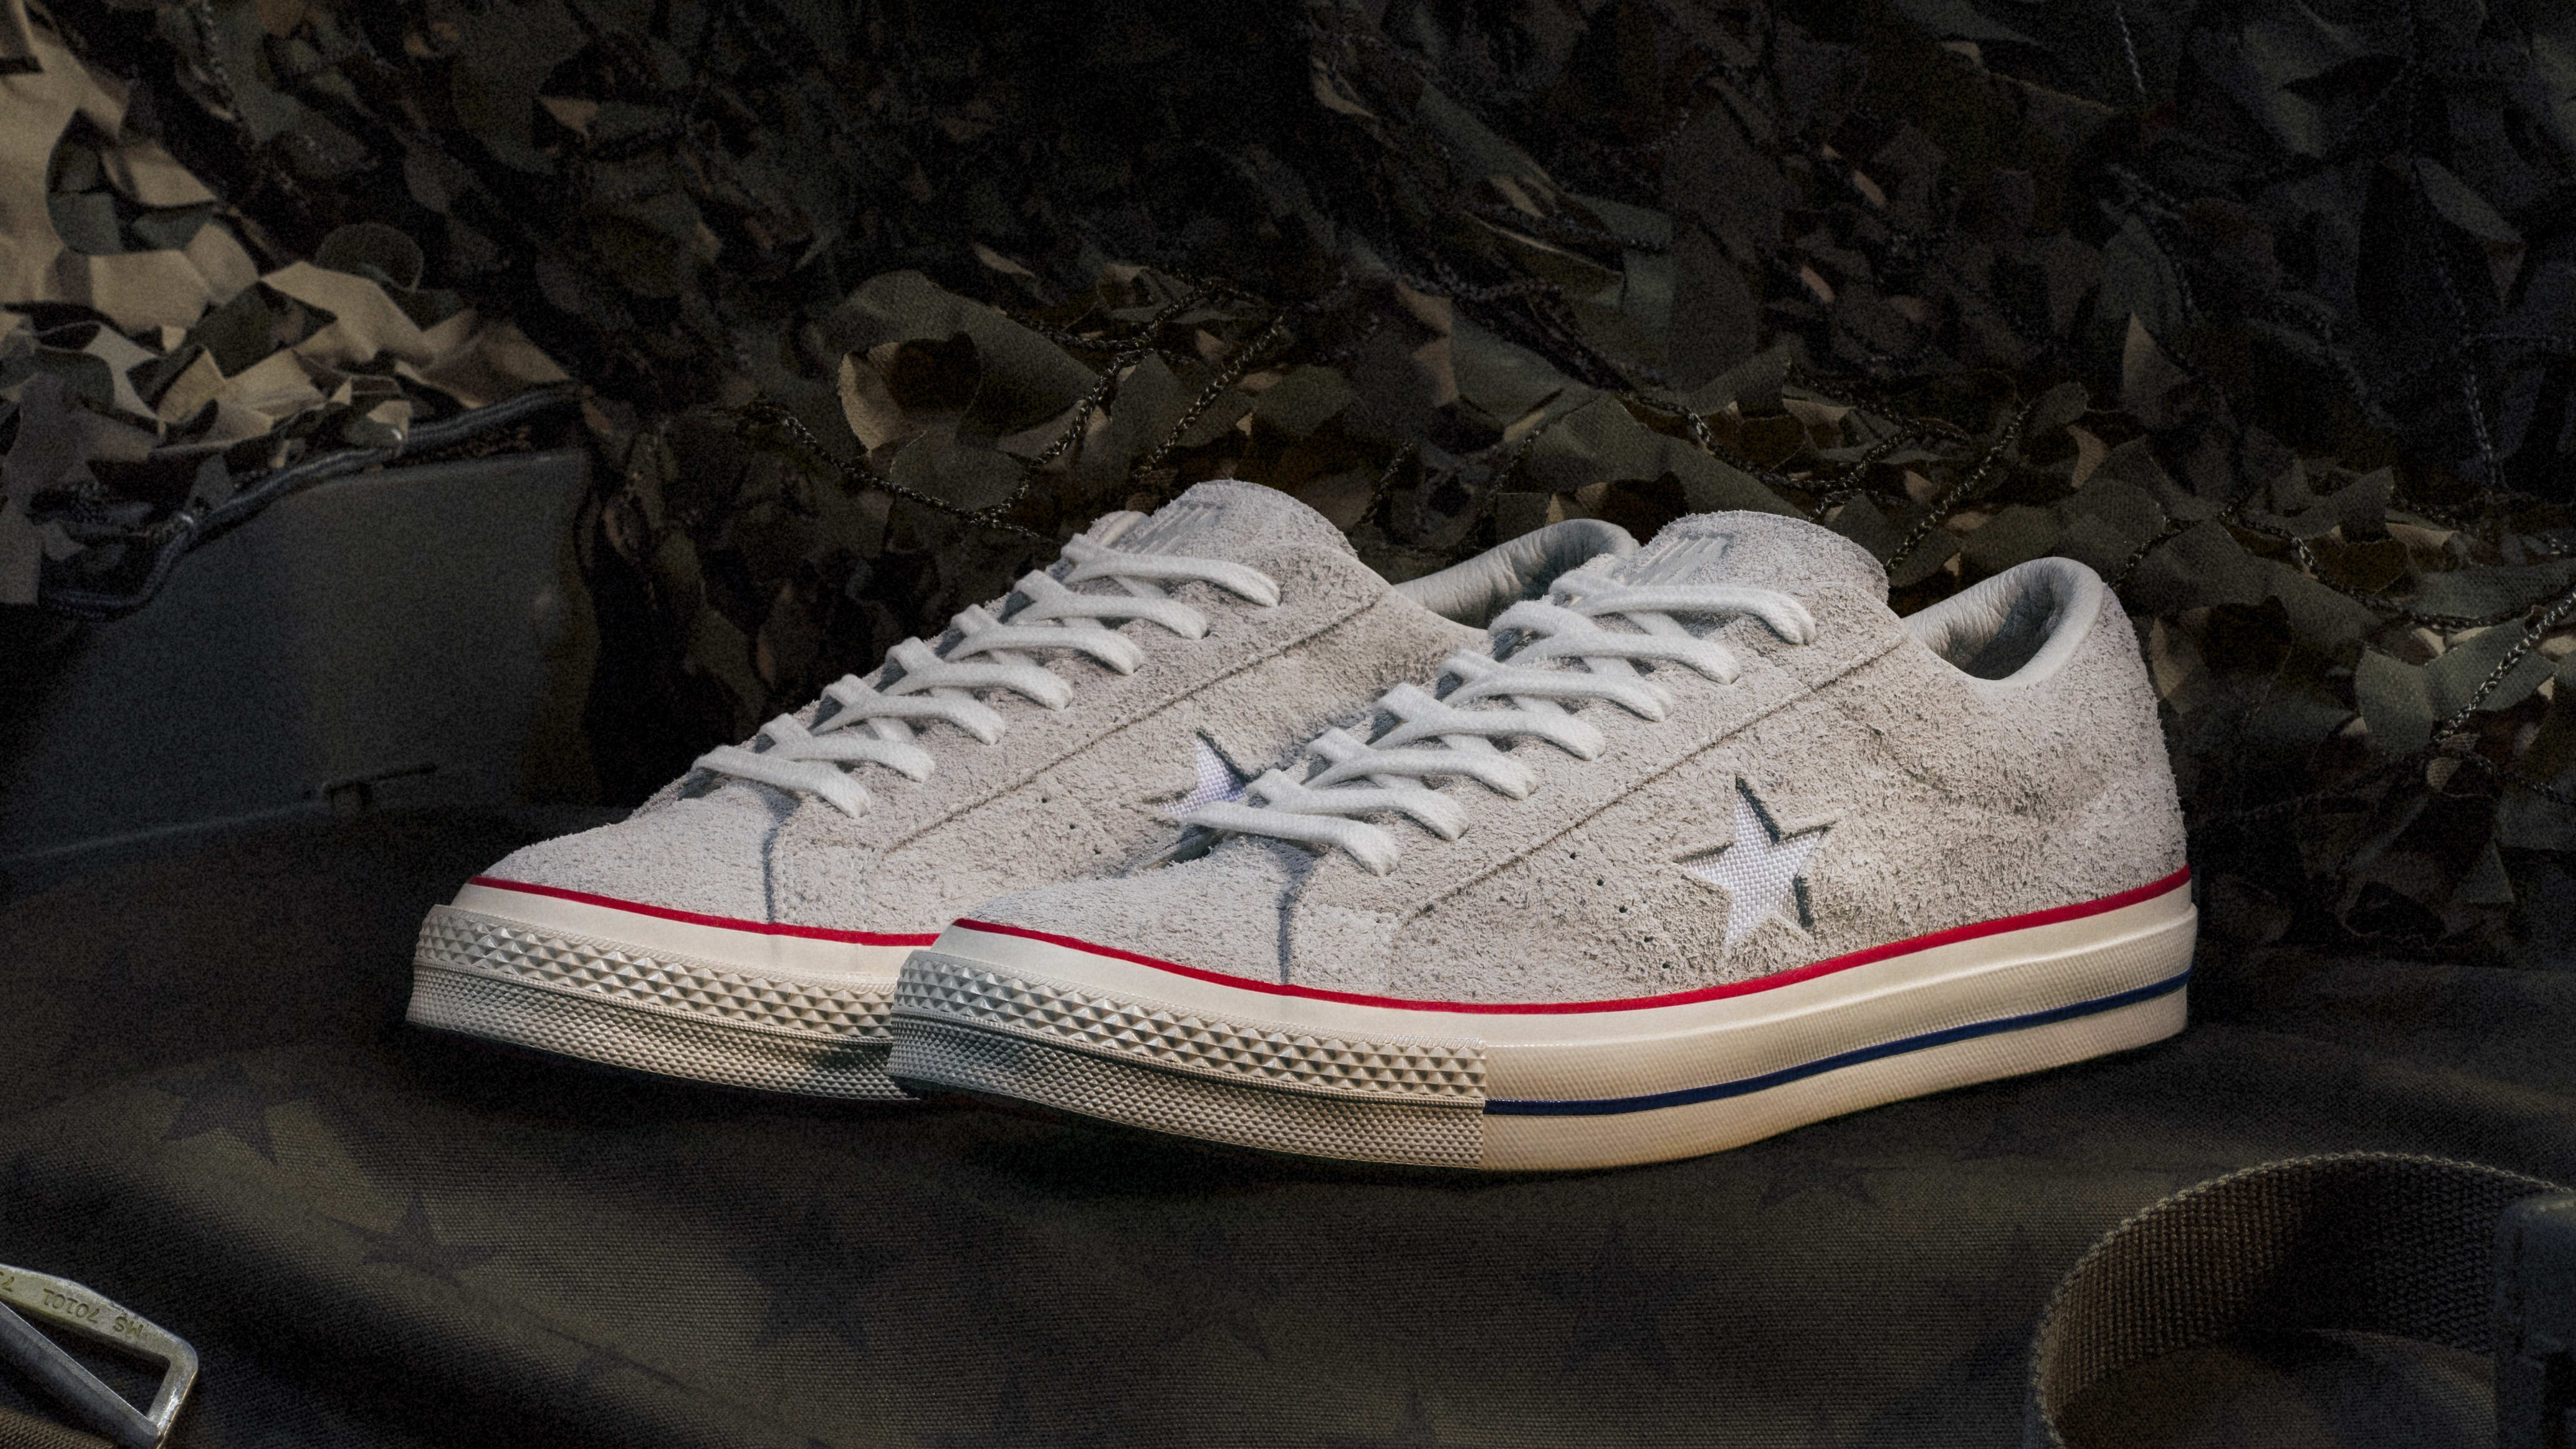 Converse’s And Undeafeated Collaborate On One Star Collection